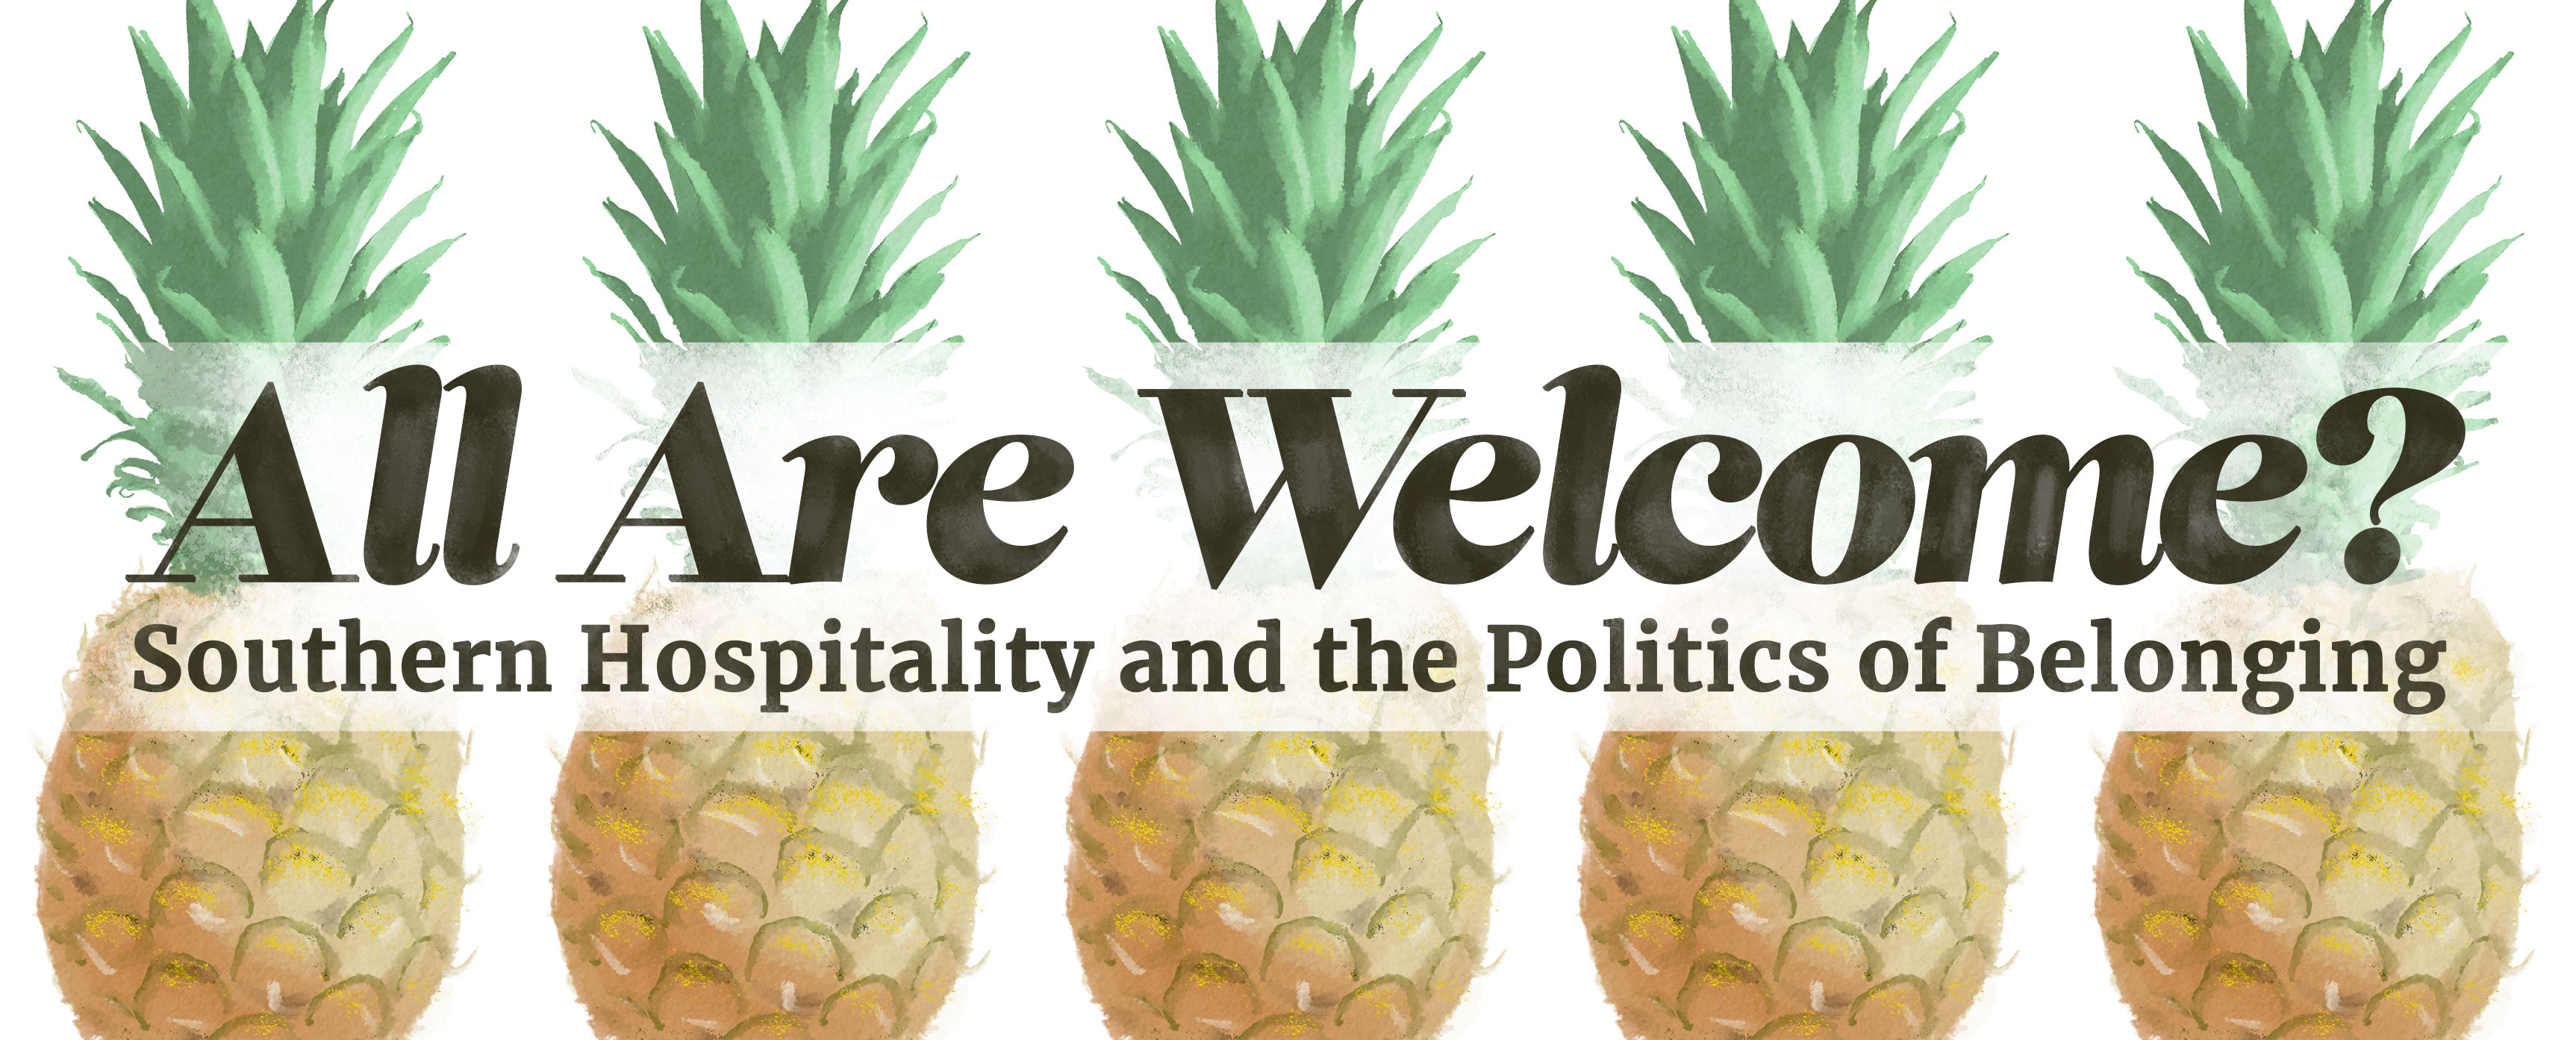 All Are Welcome? Southern Hospitality and the Politics of Belonging